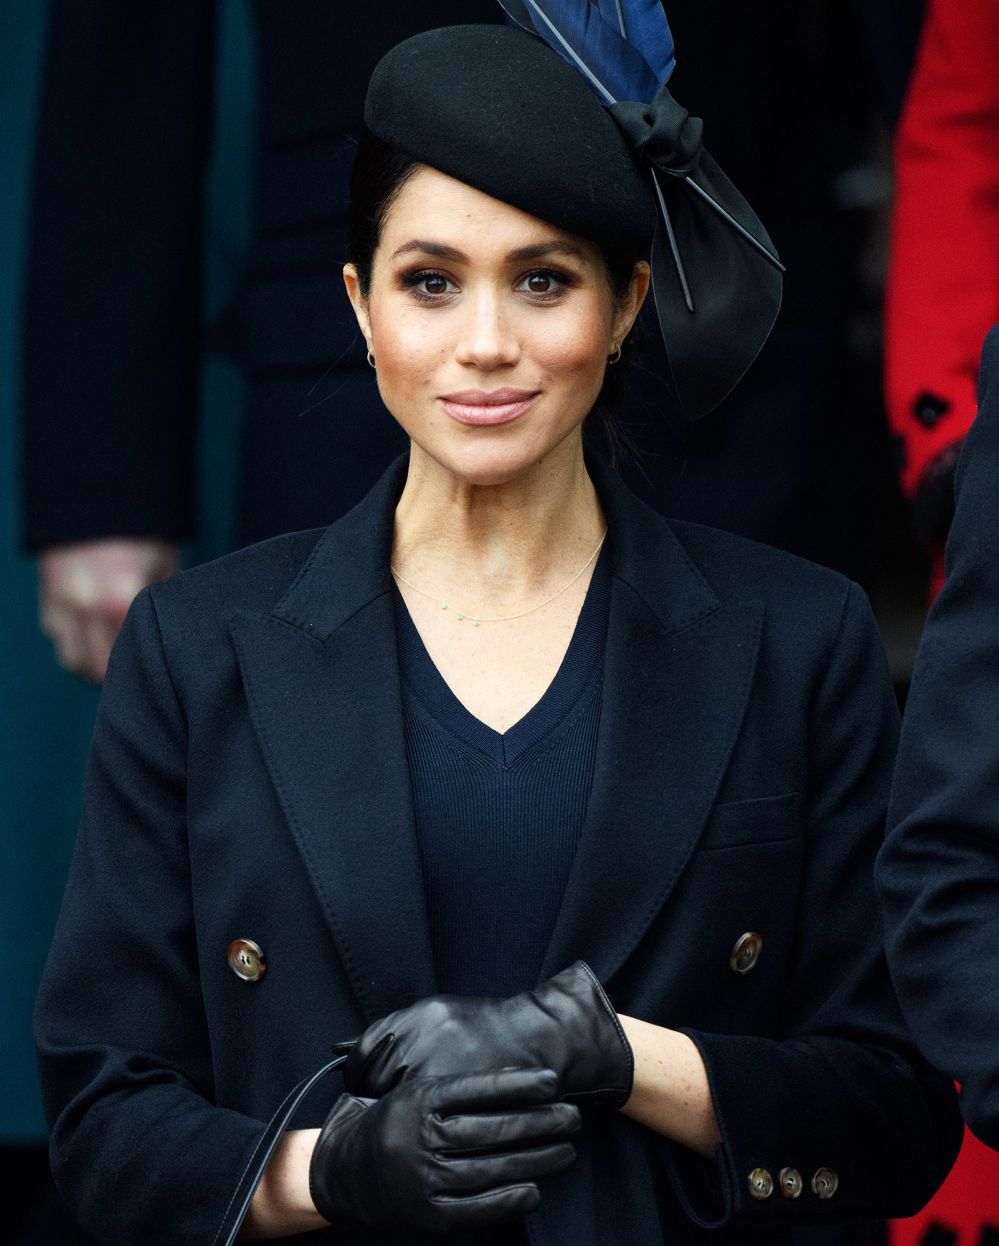 Why Meghan Markle Gave Up Her Passport, Keys After Marrying Royal ...